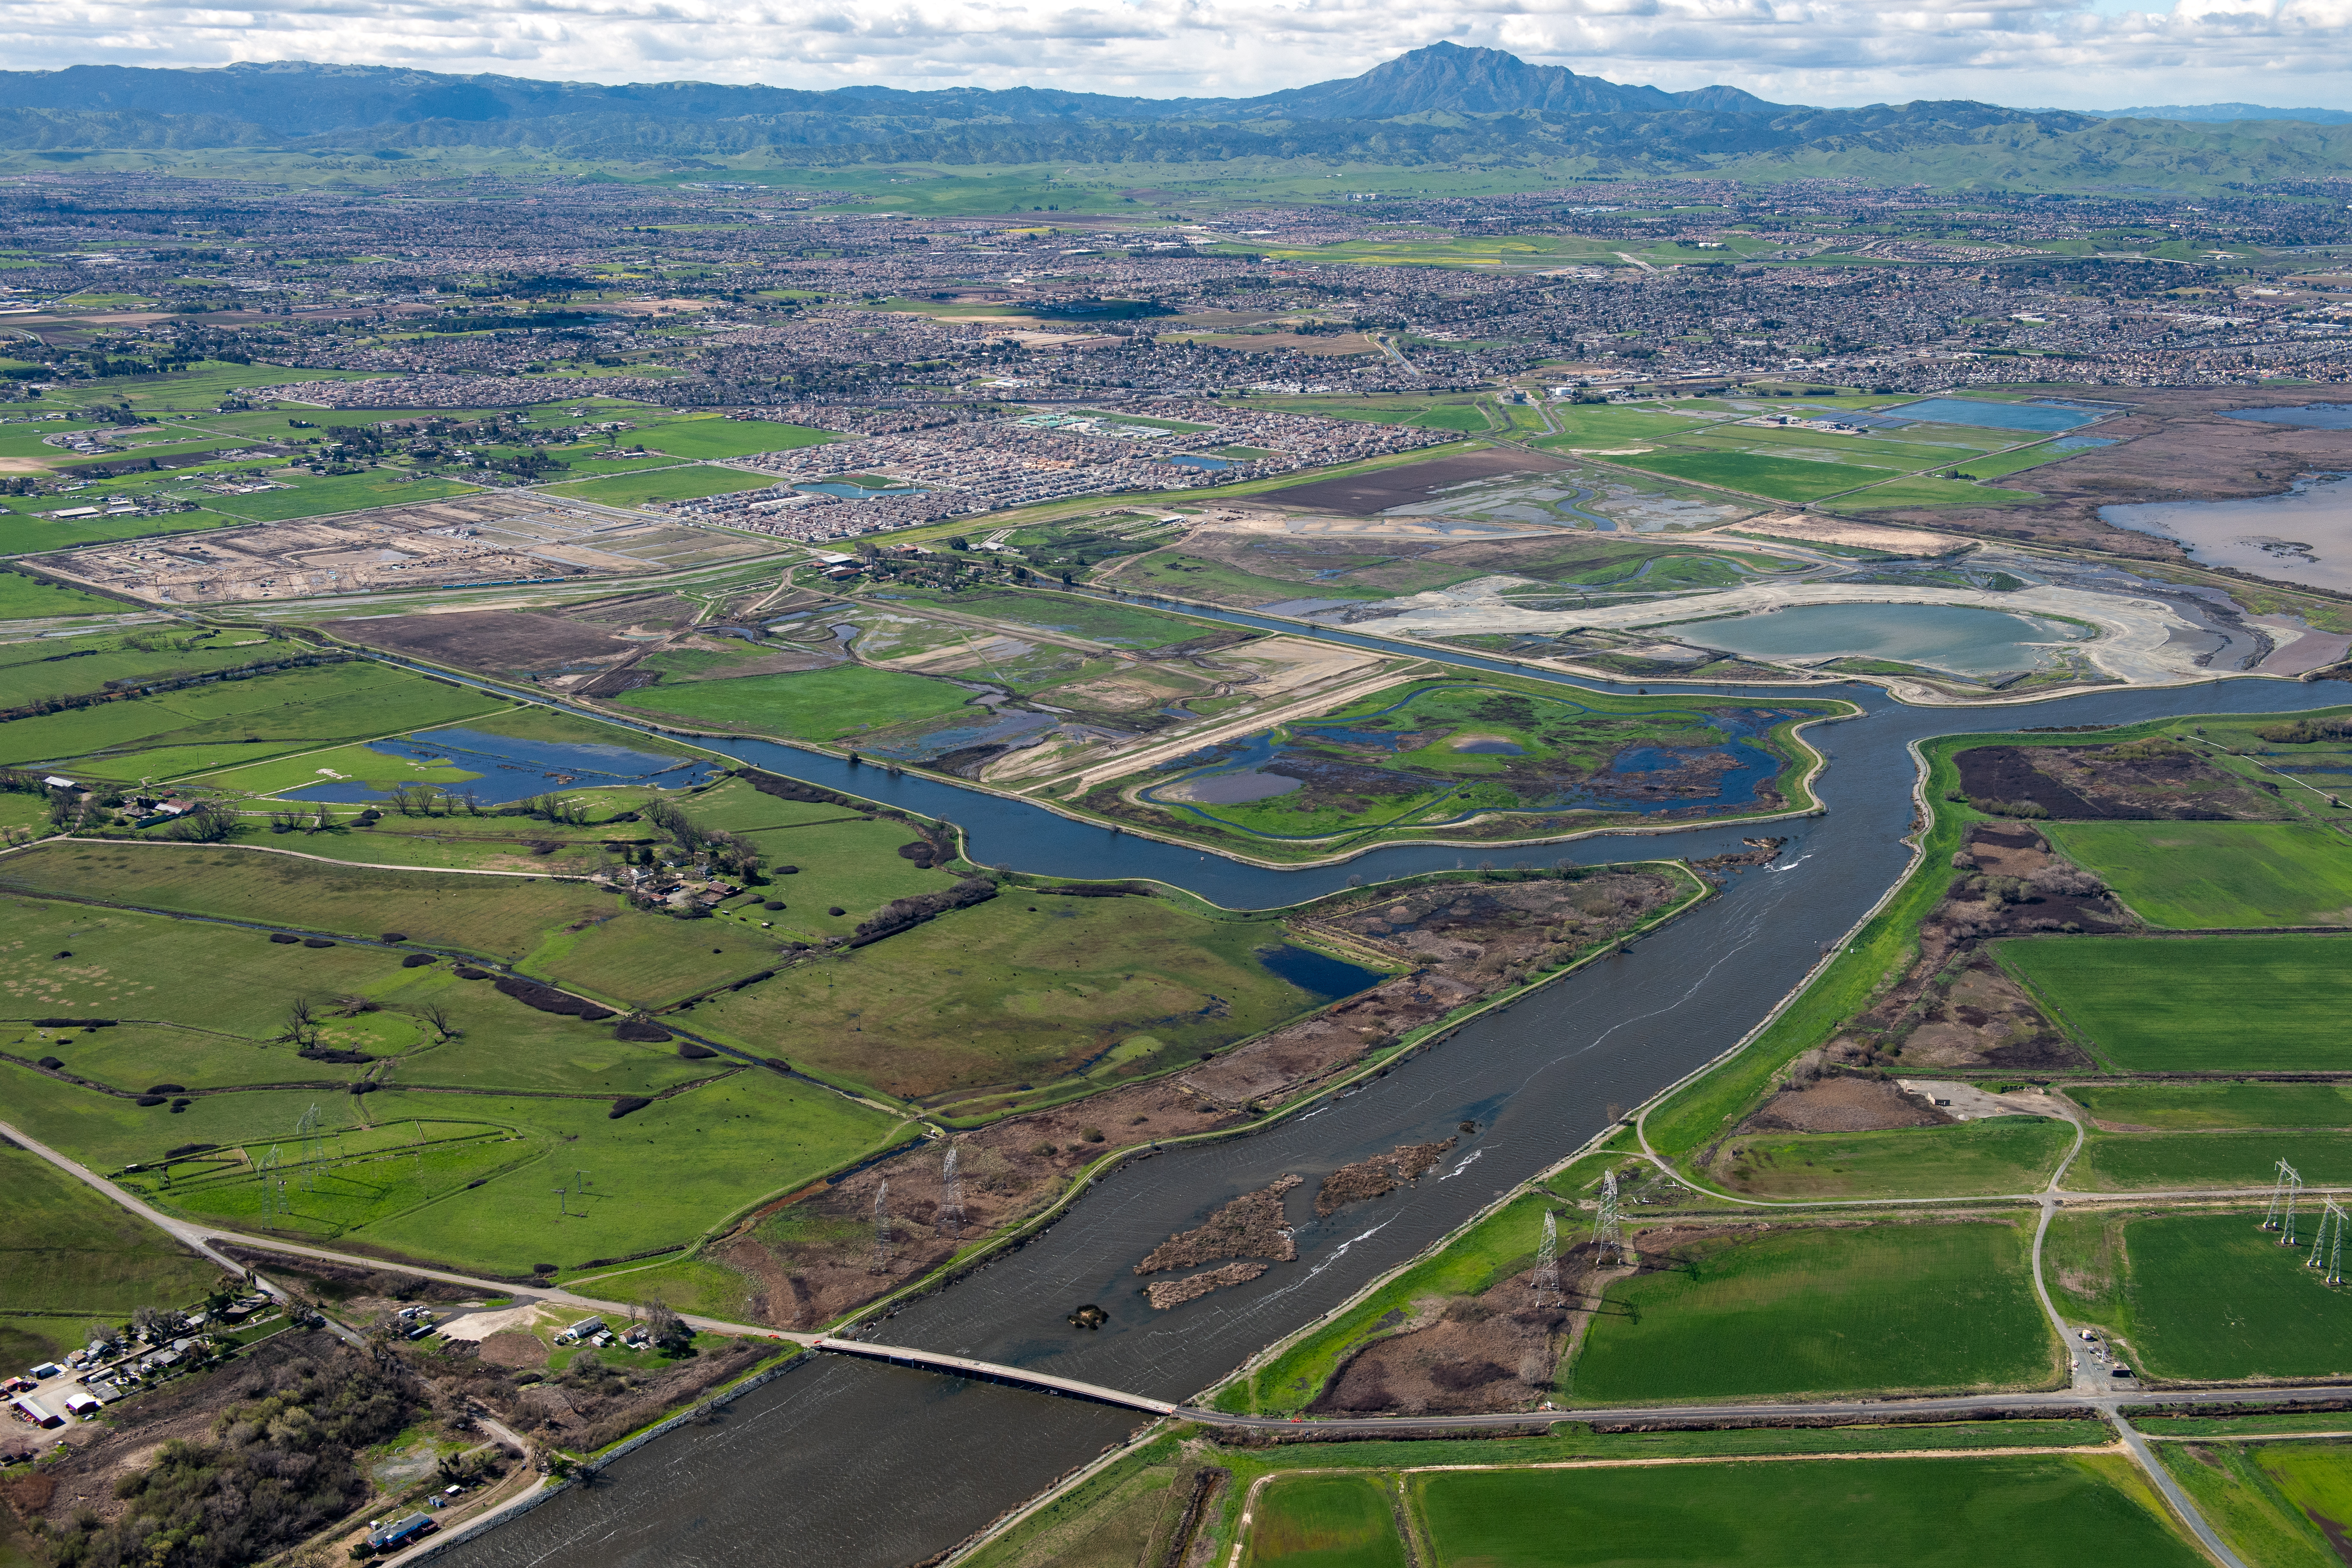 Aerial view looking South-West of the Dutch Slough Tidal Marsh Restoration Project the construction site in the Sacramento-San Joaquin Delta near Oakley, California.